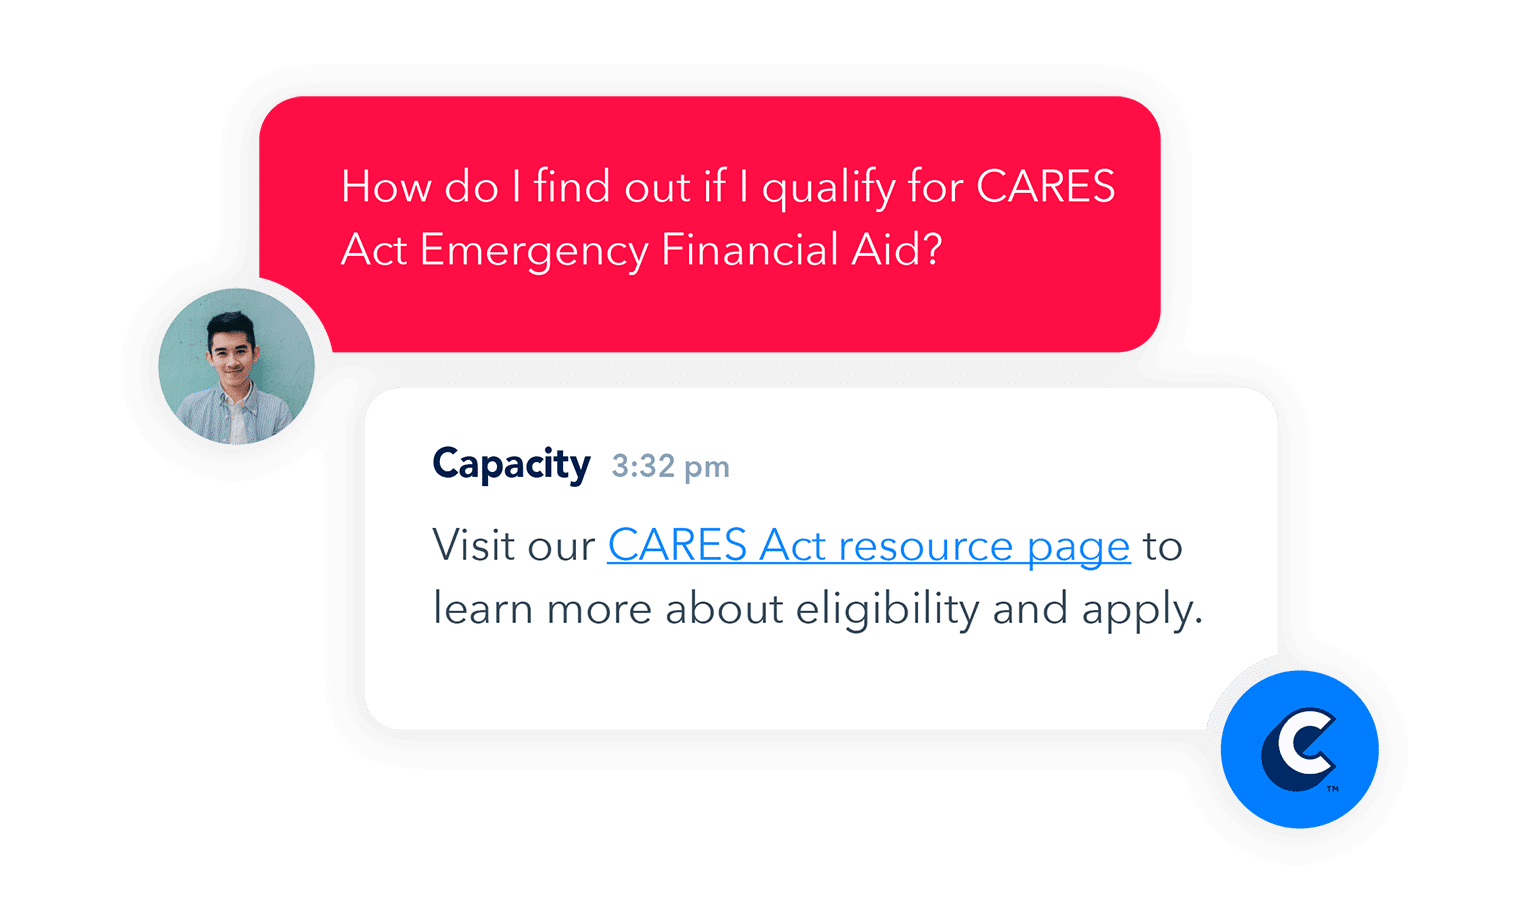 a chat exchange between a student and the capacity bot regarding qualifying for CARES act financial aid